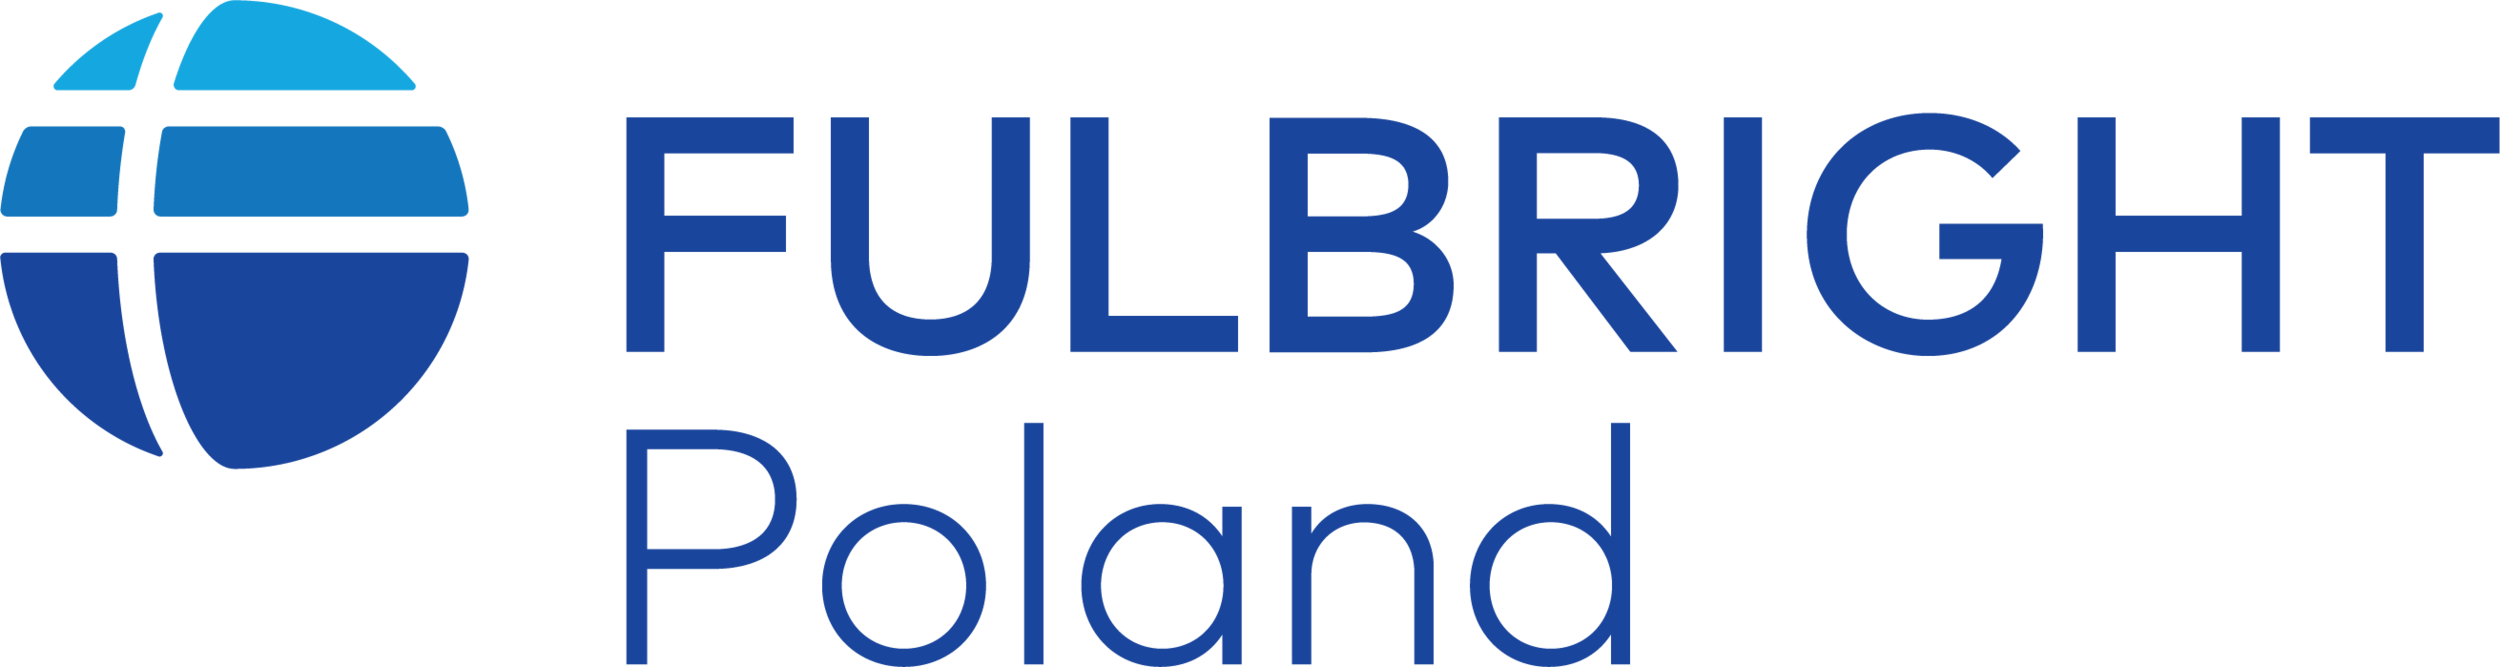 Fulbright_new_logo.png